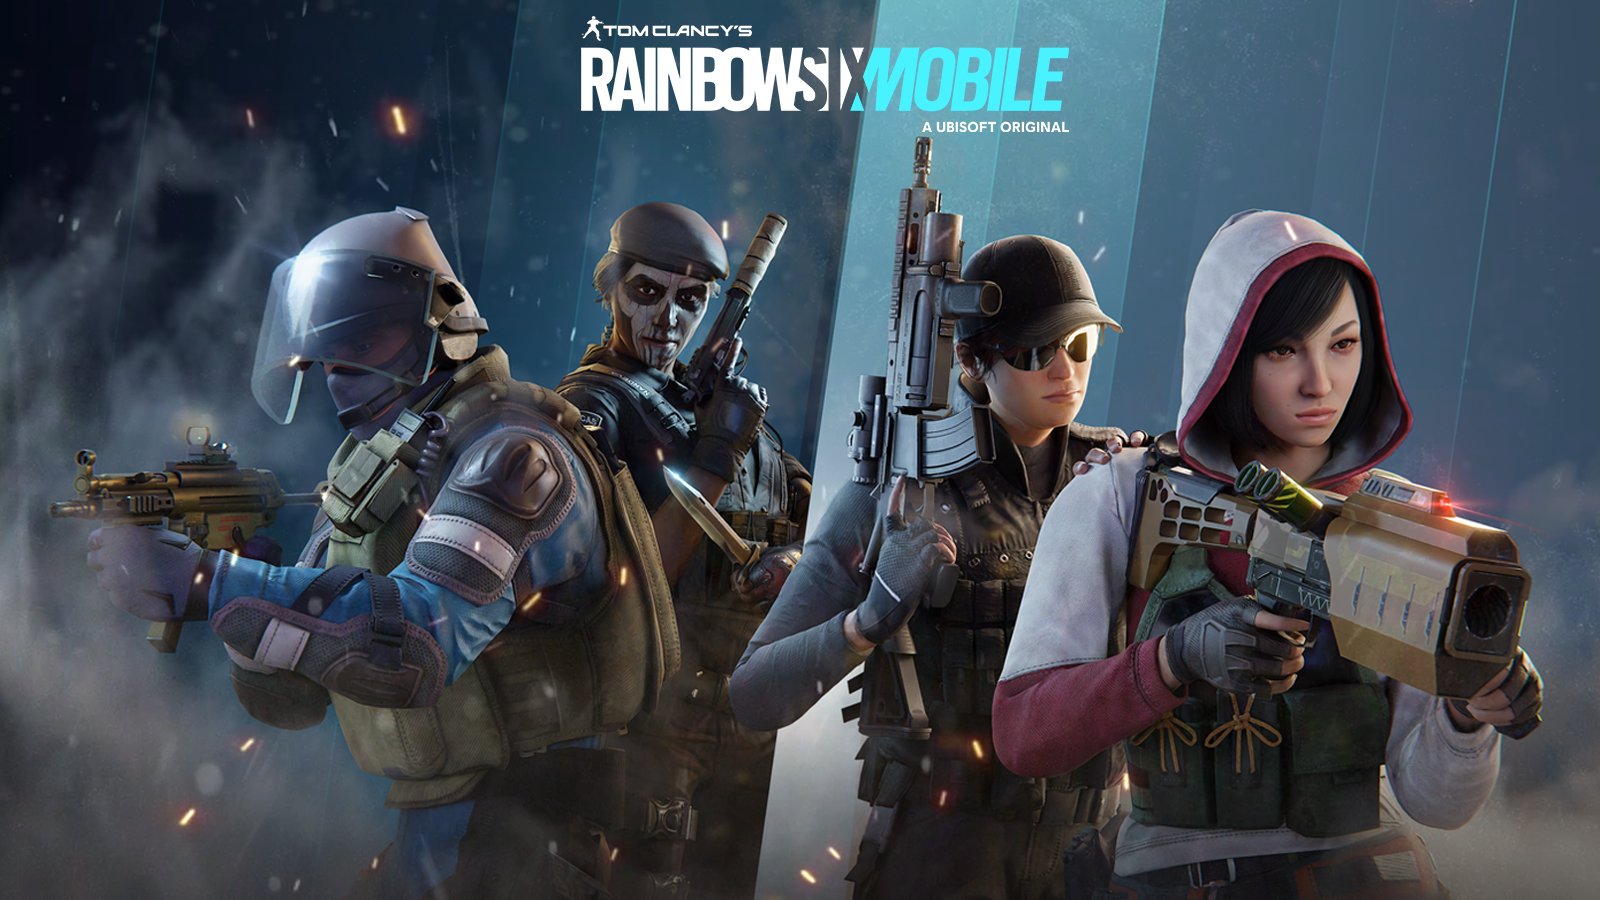 how to play Rainbow Six MOBILE 👑.𝗥𝗔𝗜𝗡𝗕𝗢𝗪 𝗦𝗜𝗫 𝗠𝗢𝗕𝗜𝗟𝗘.